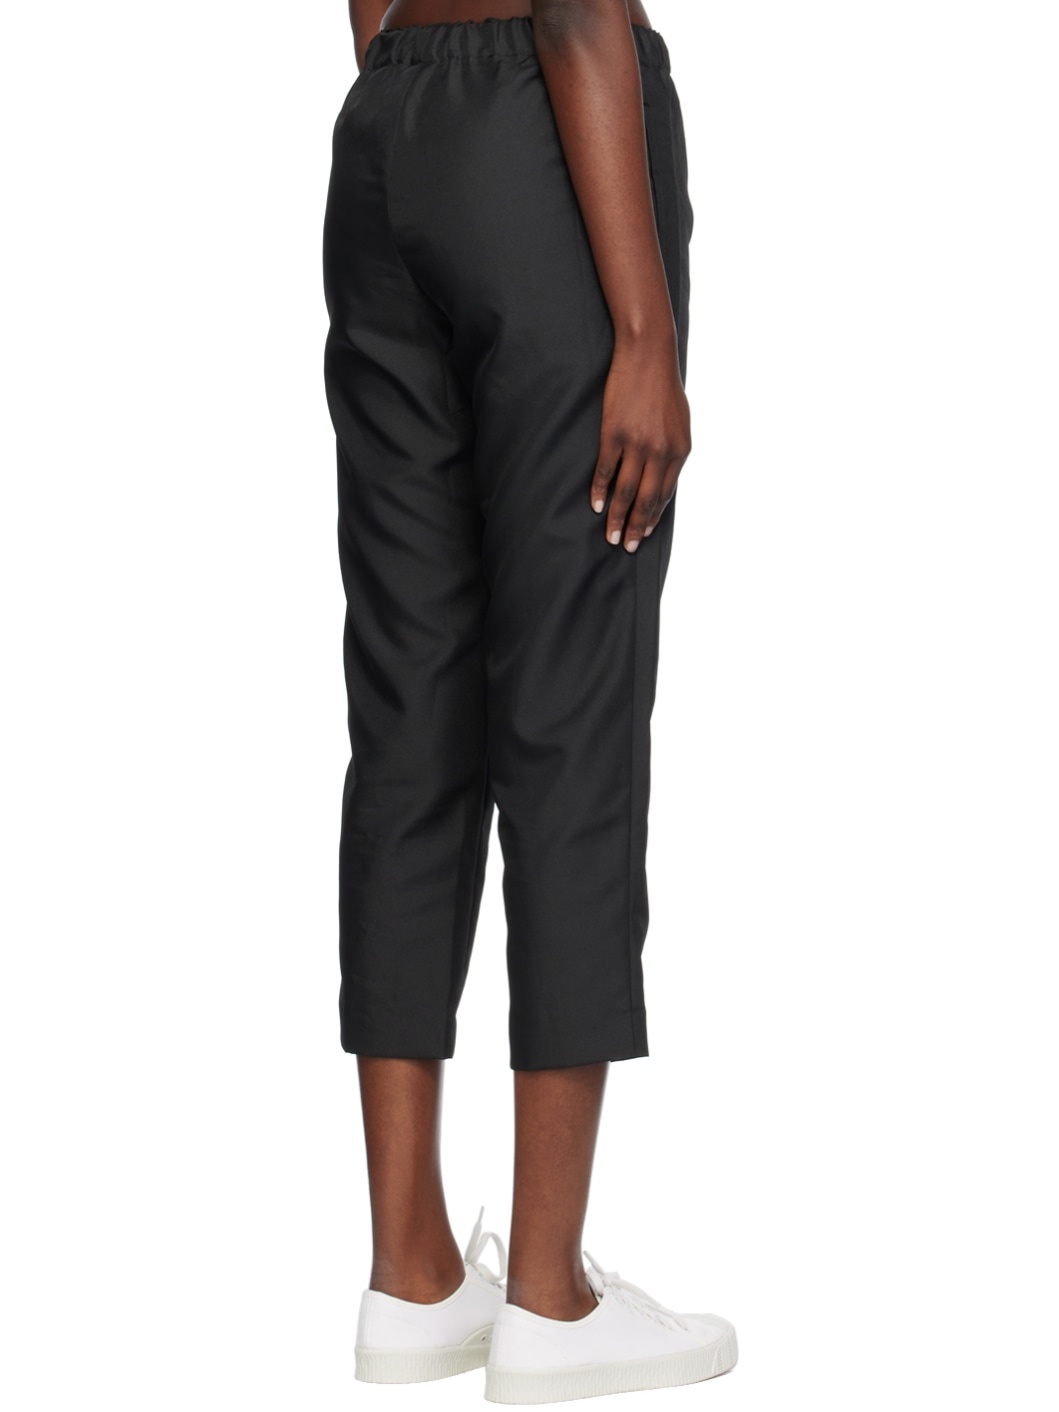 Black Garment-Washed Trousers - 3